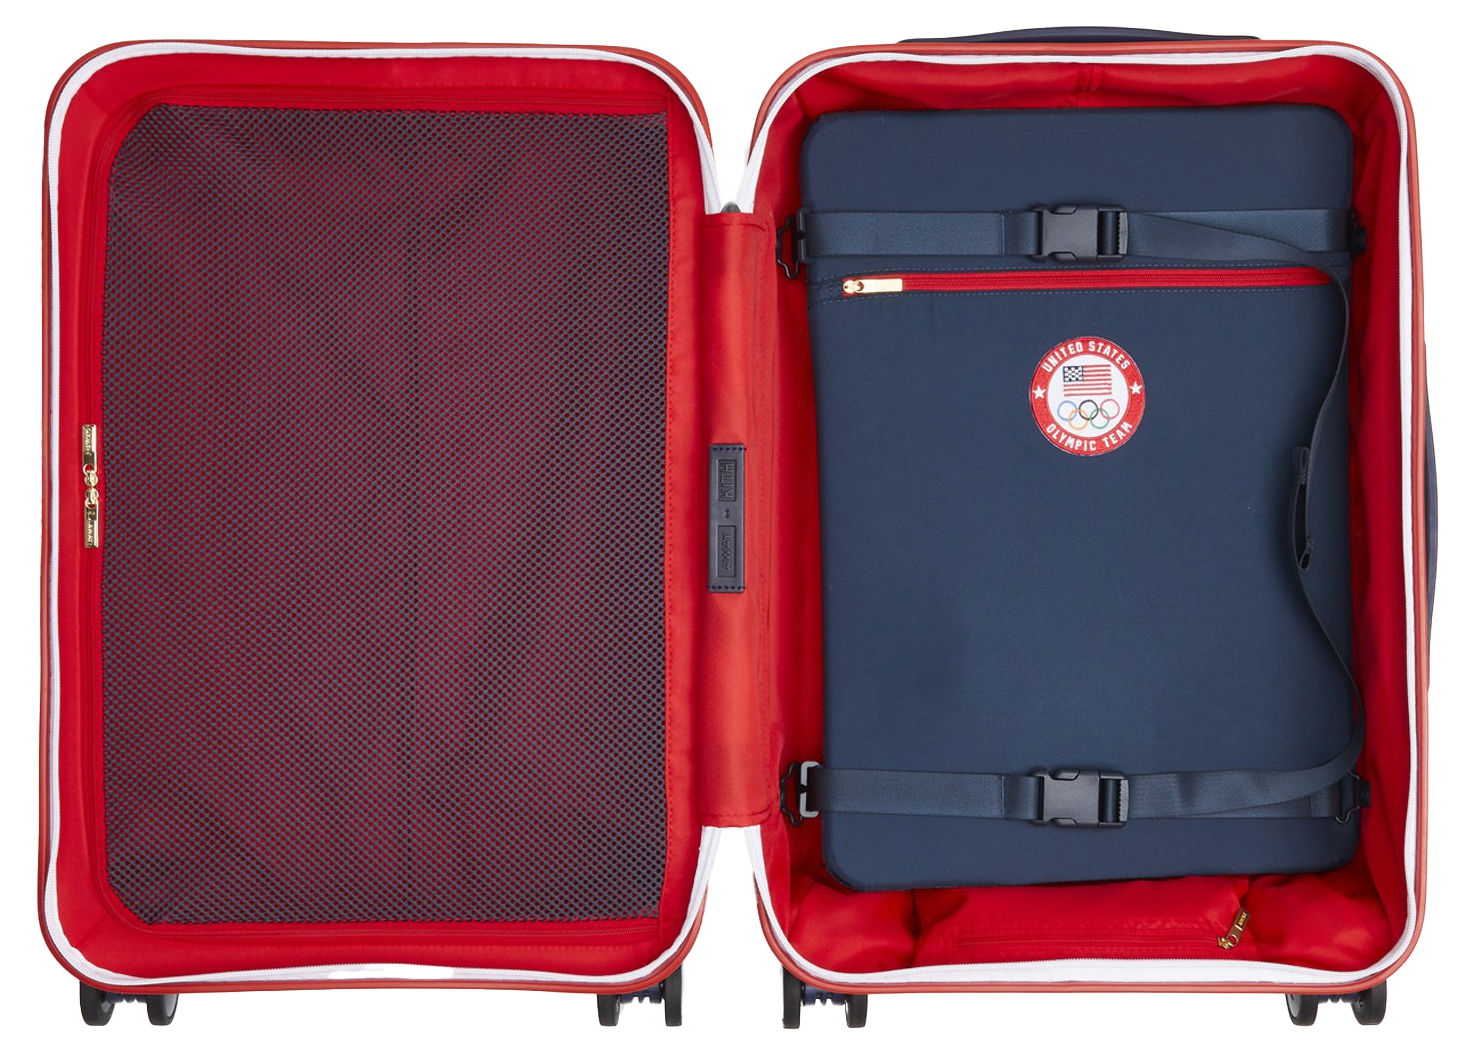 Kith for Team USA & Away PC Bigger Carry-on Luggage White - SS21 - US